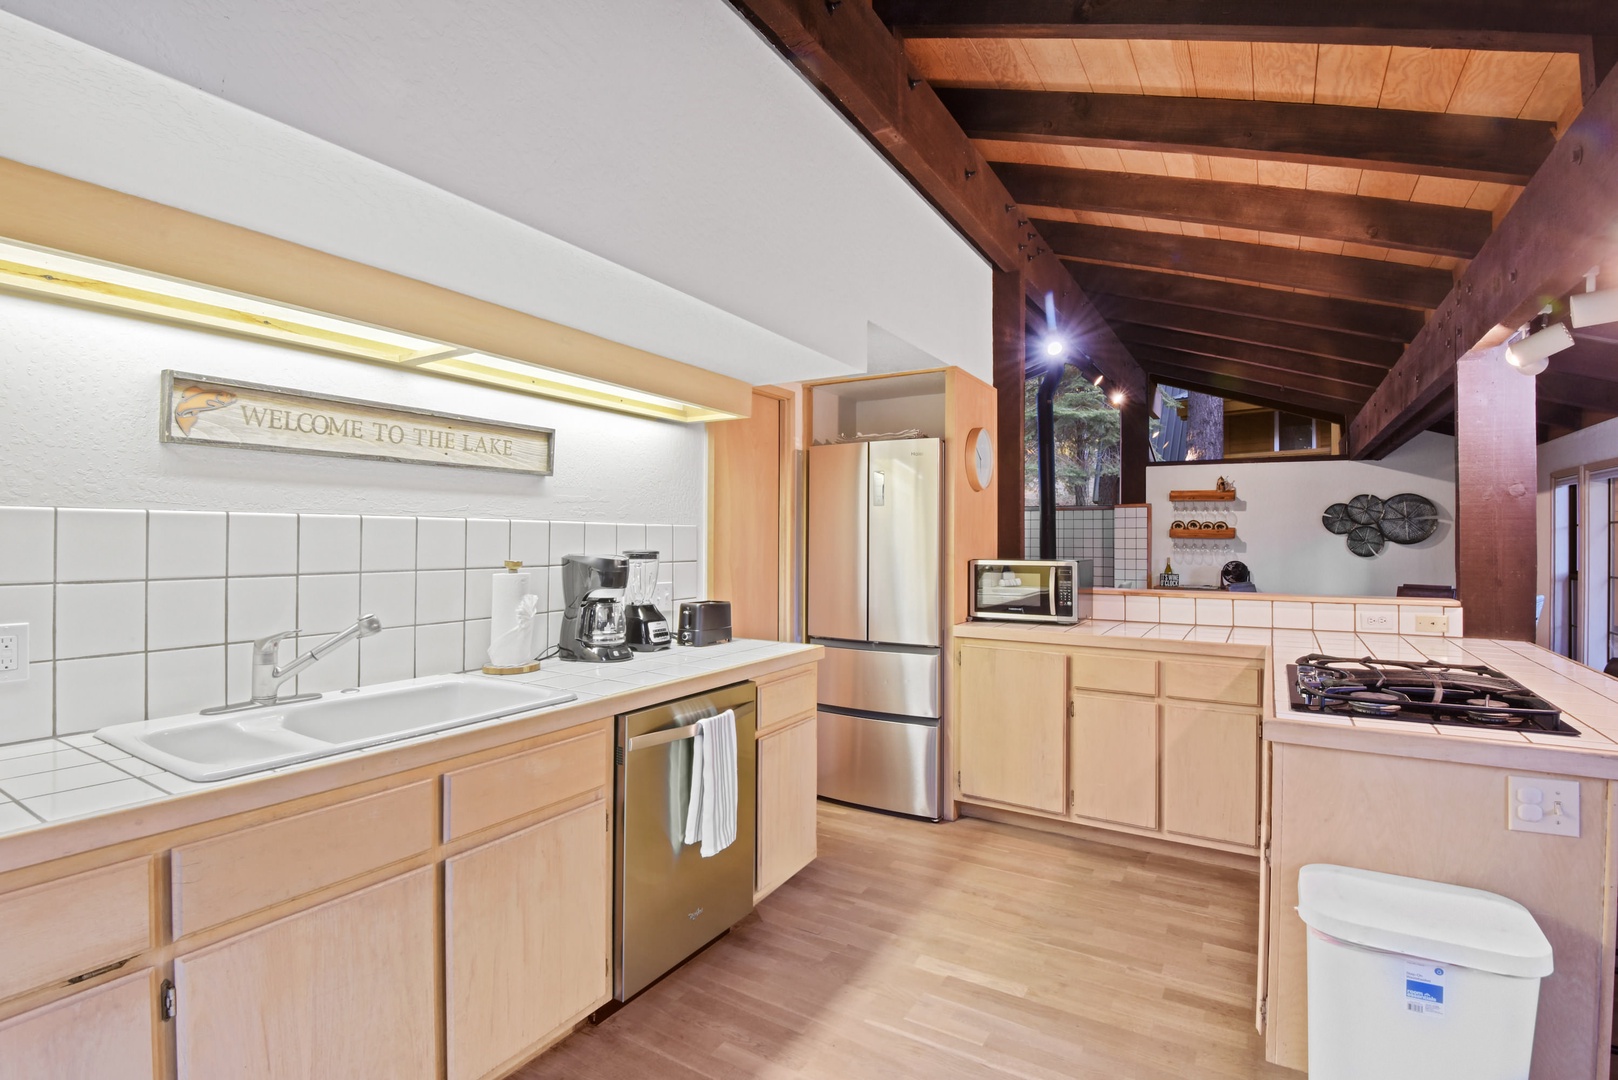 Kitchen with drip coffee maker, blender, toaster, and more